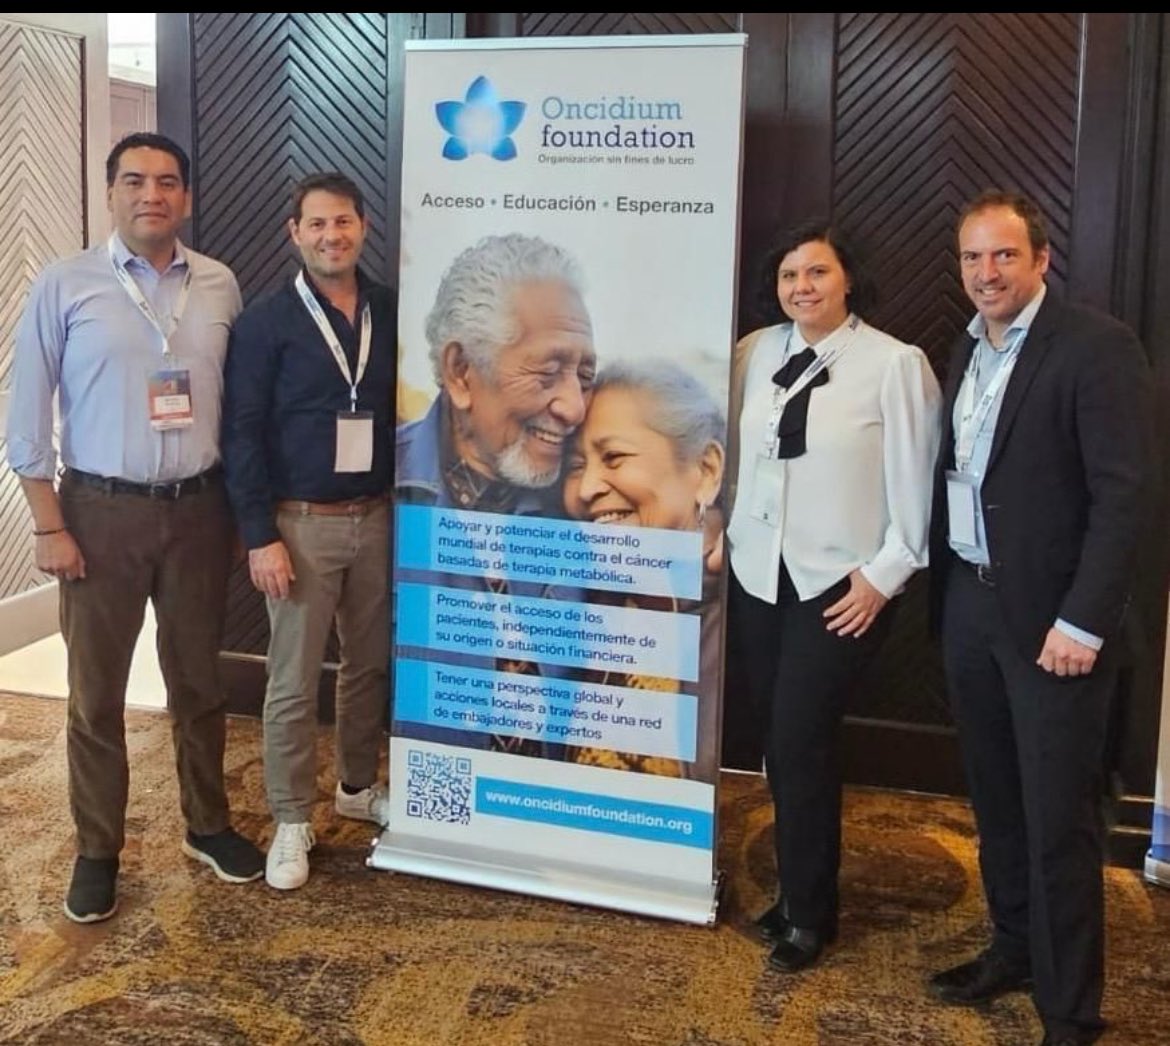 Sharing moments and collaborating on projects with the Mexican ambassadors and board members of the @OncidiumFoundat has been both enjoyable and enlightening. @sepsis000 @VaskoKramer @IvanDiazMeneses #radiopharmaceuticals #oncology #theranostics